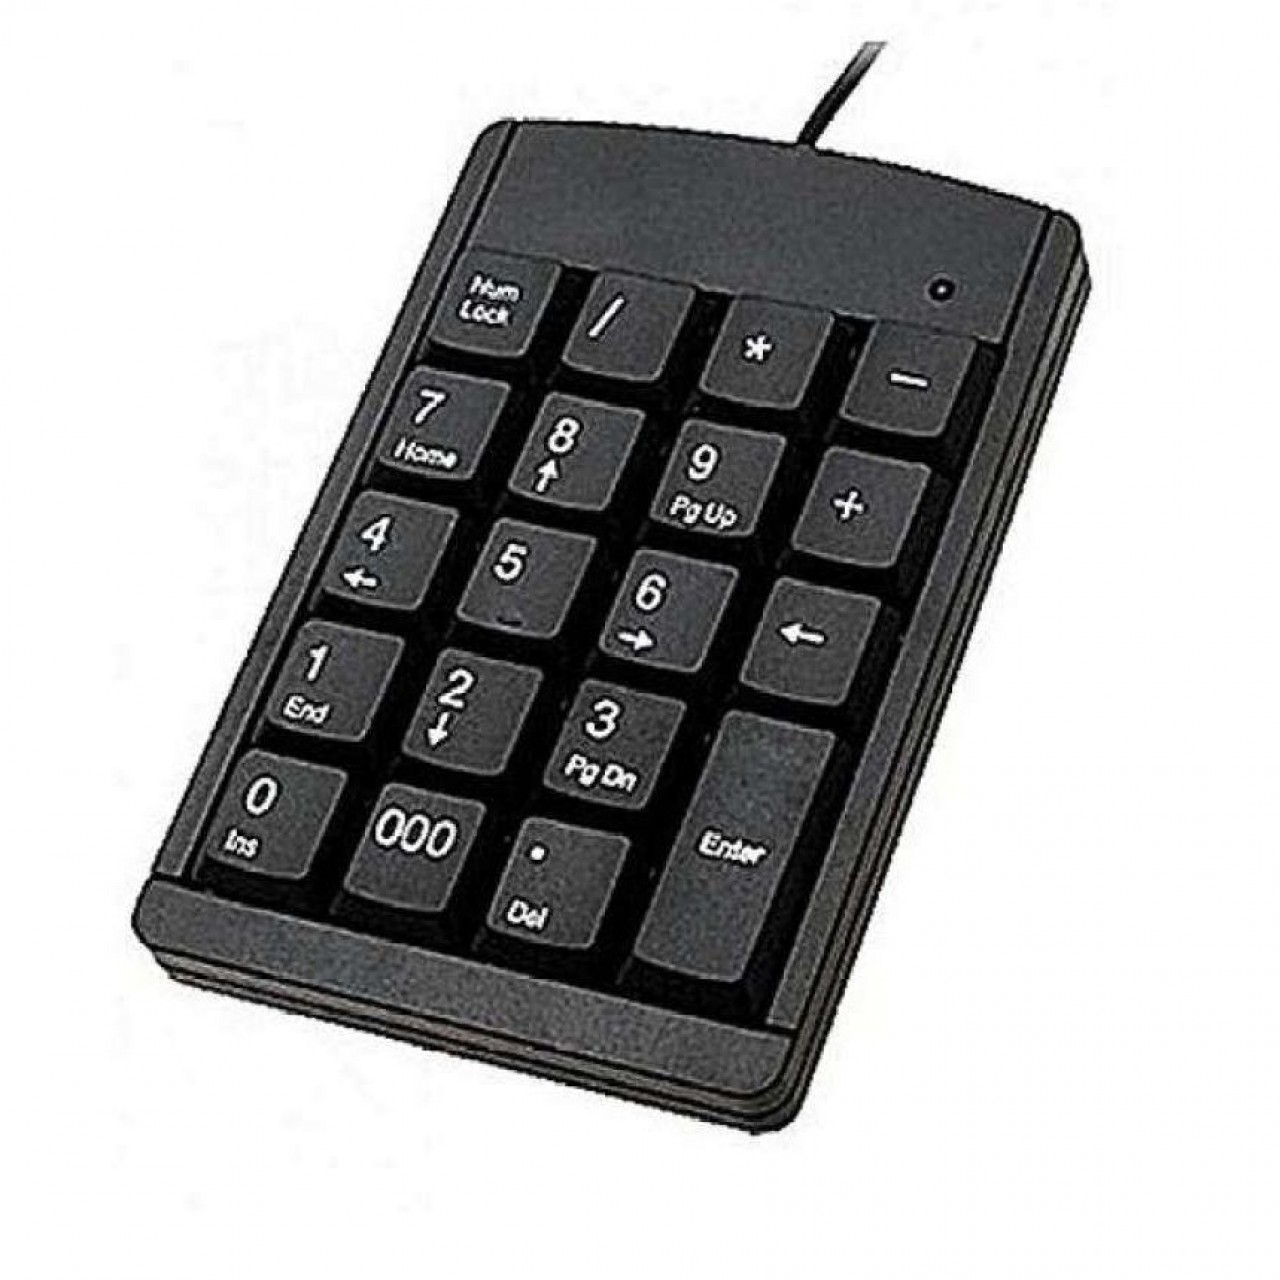 Standard Num-Pad For Numerical Inputs Controls - Fastest Key Response